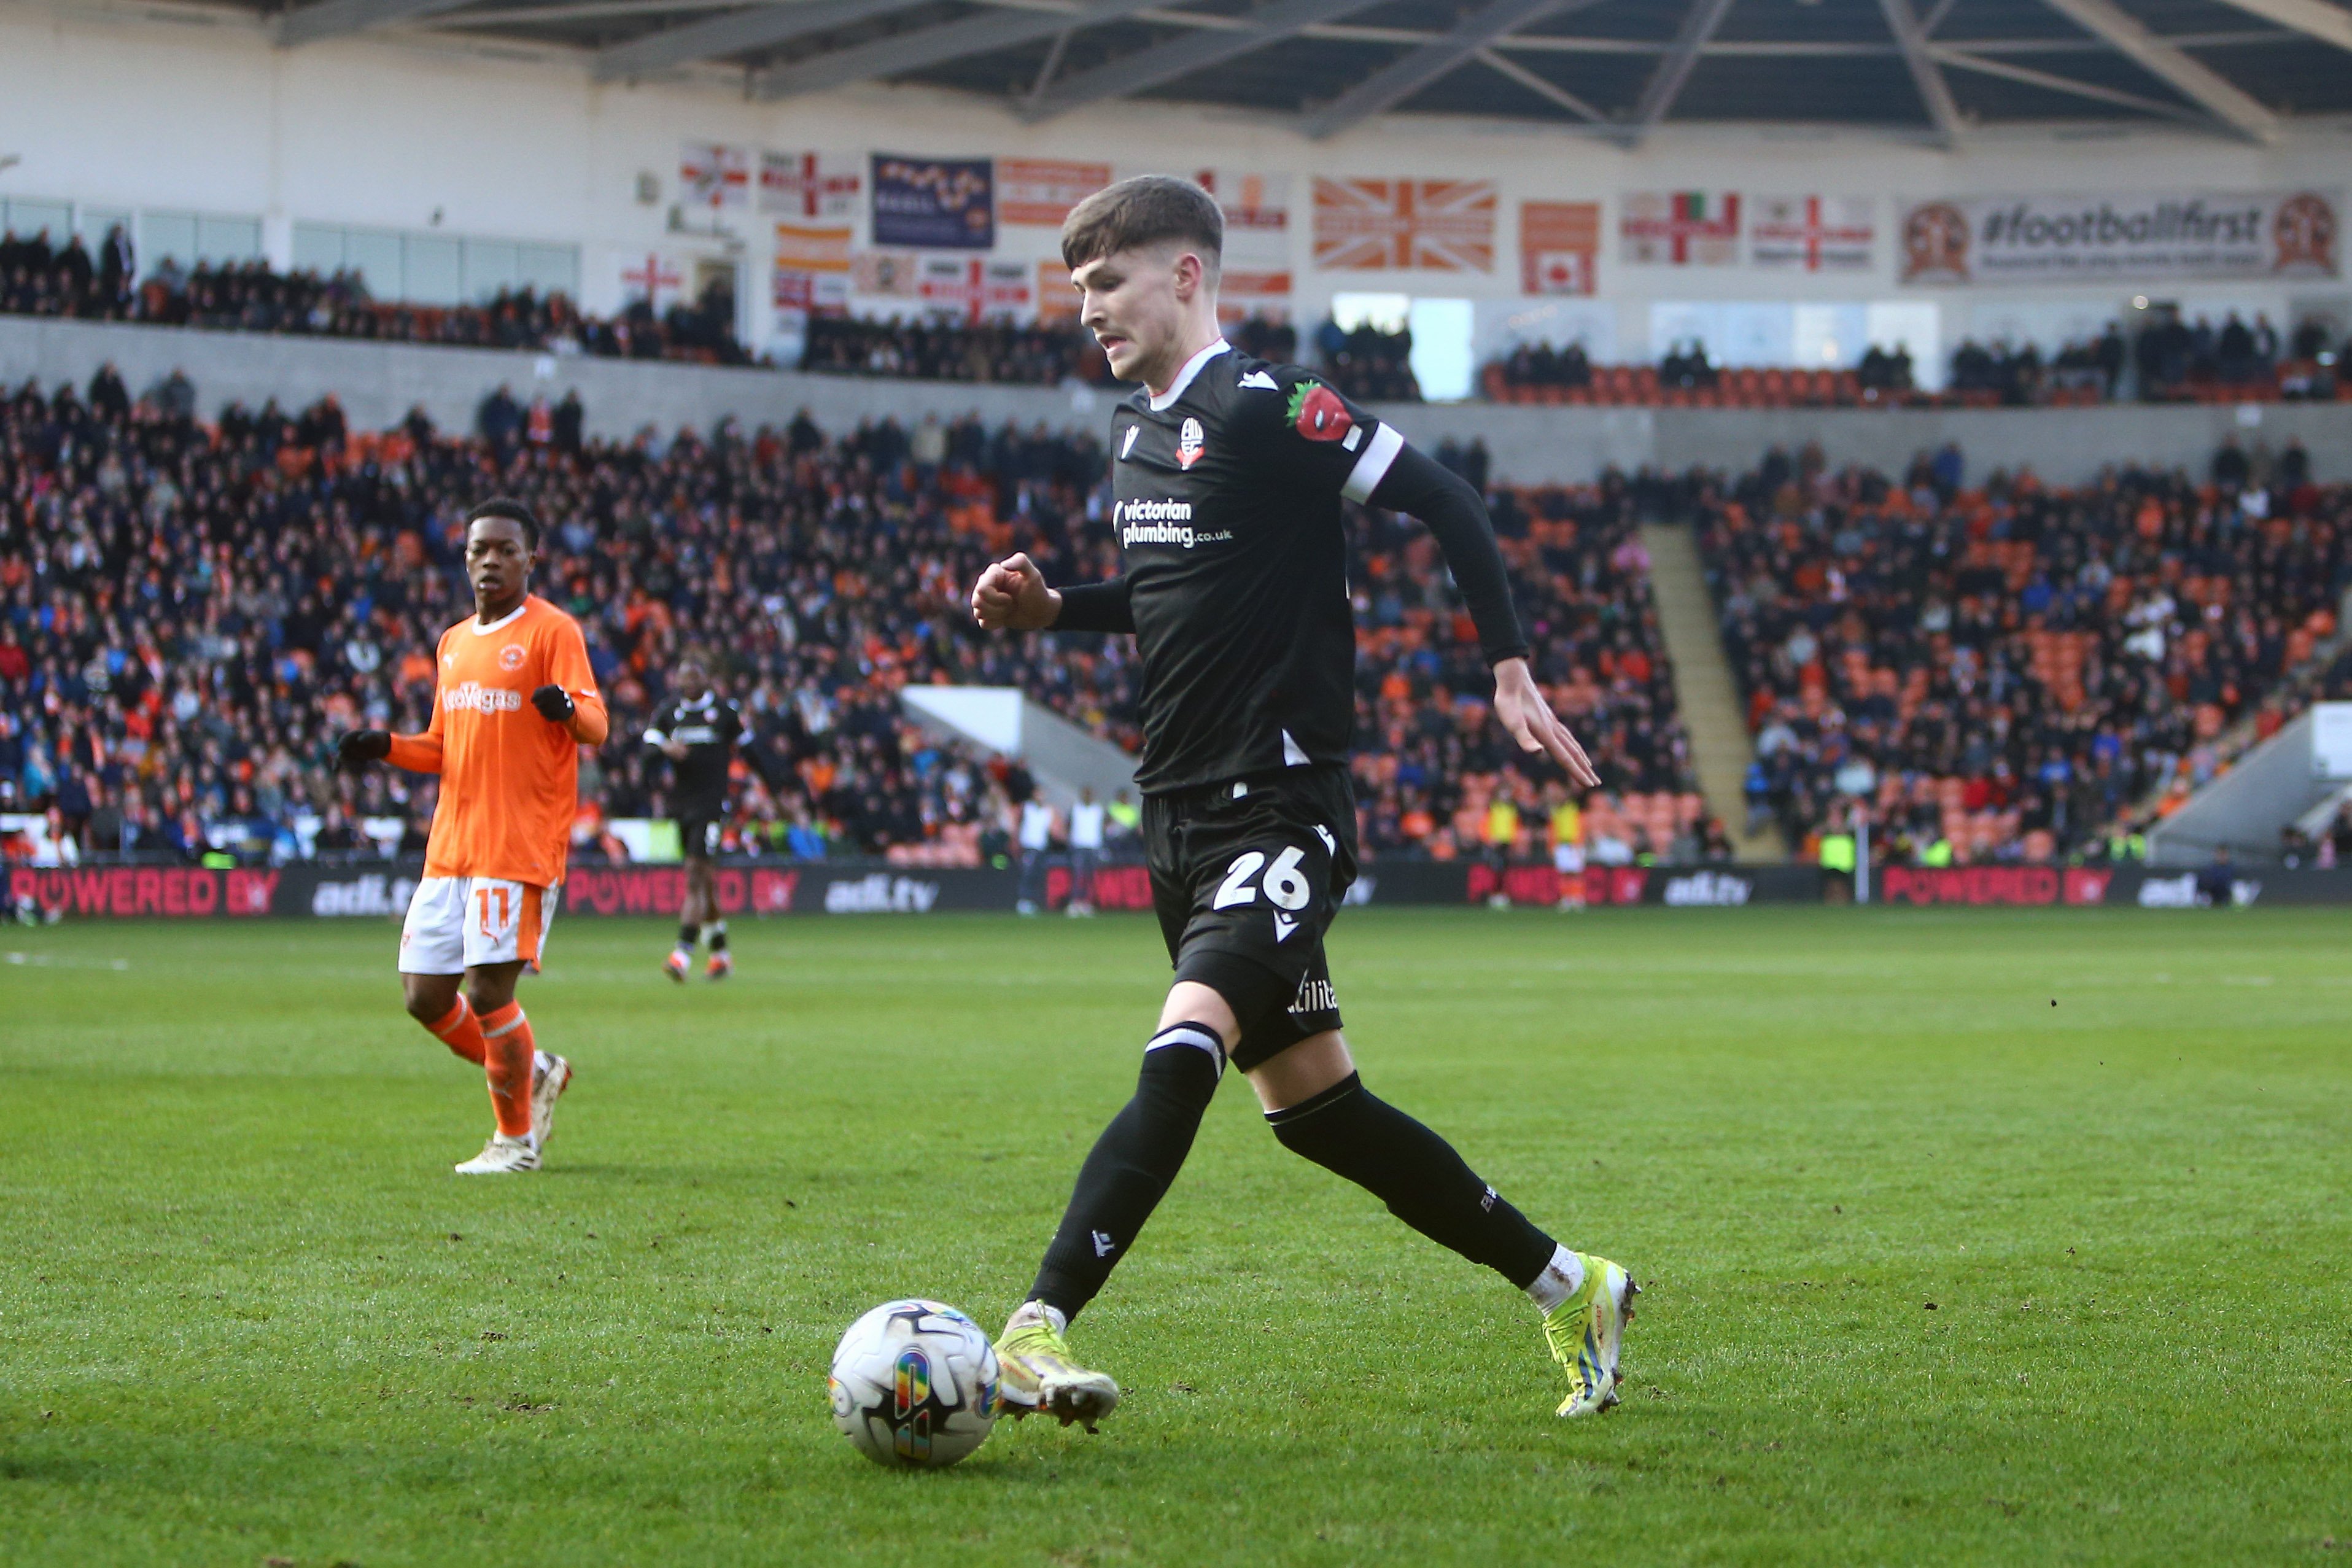 Zac Ashworth on the ball for Bolton during the game against Blackpool at Bloomfield Road